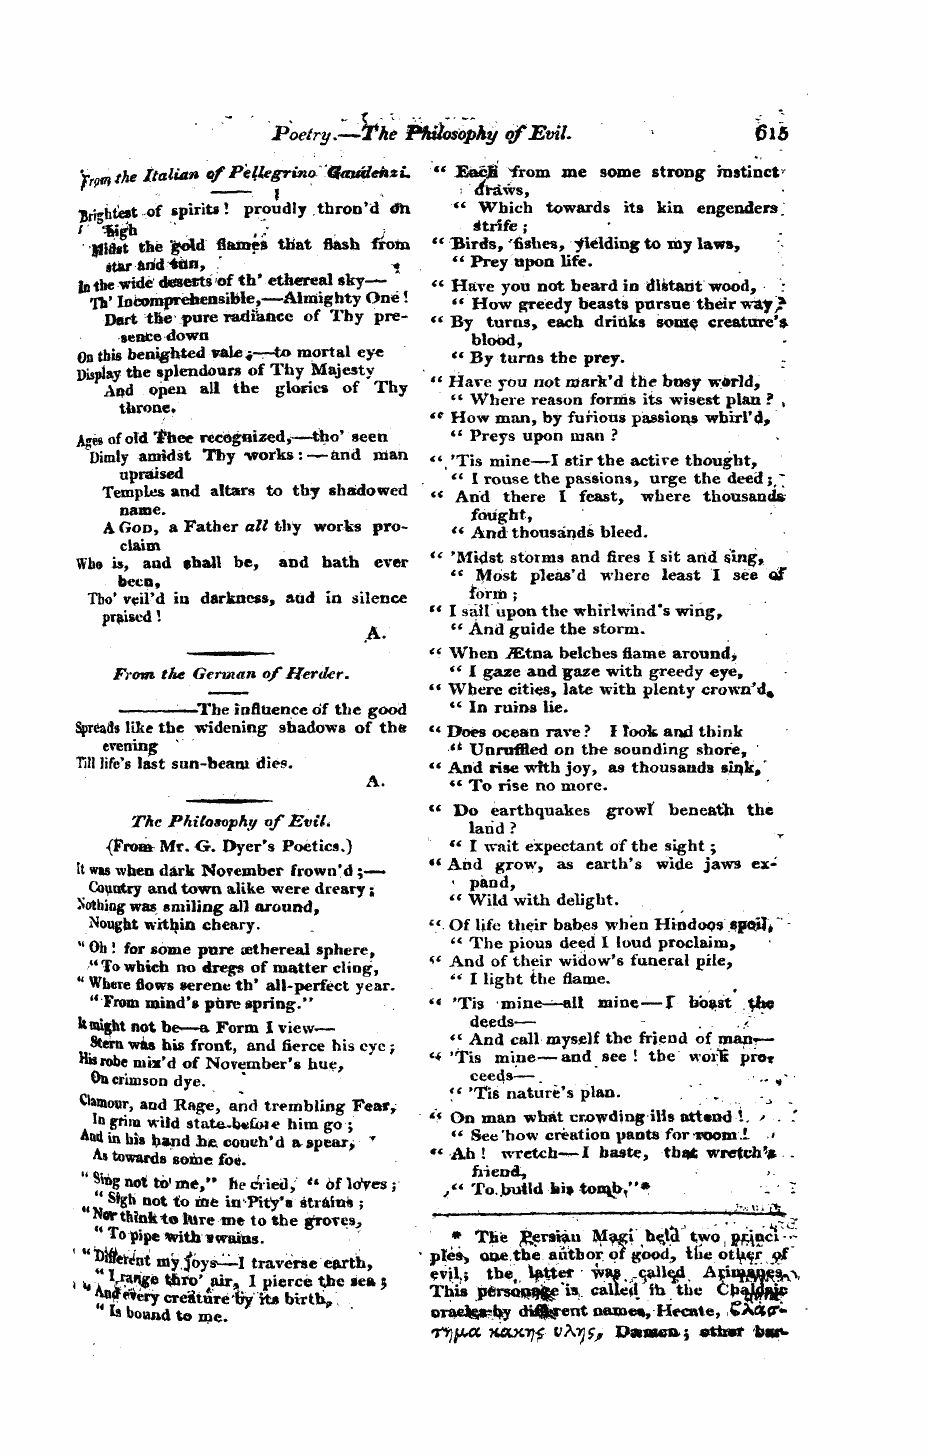 Monthly Repository (1806-1838) and Unitarian Chronicle (1832-1833): F Y, 1st edition: 51